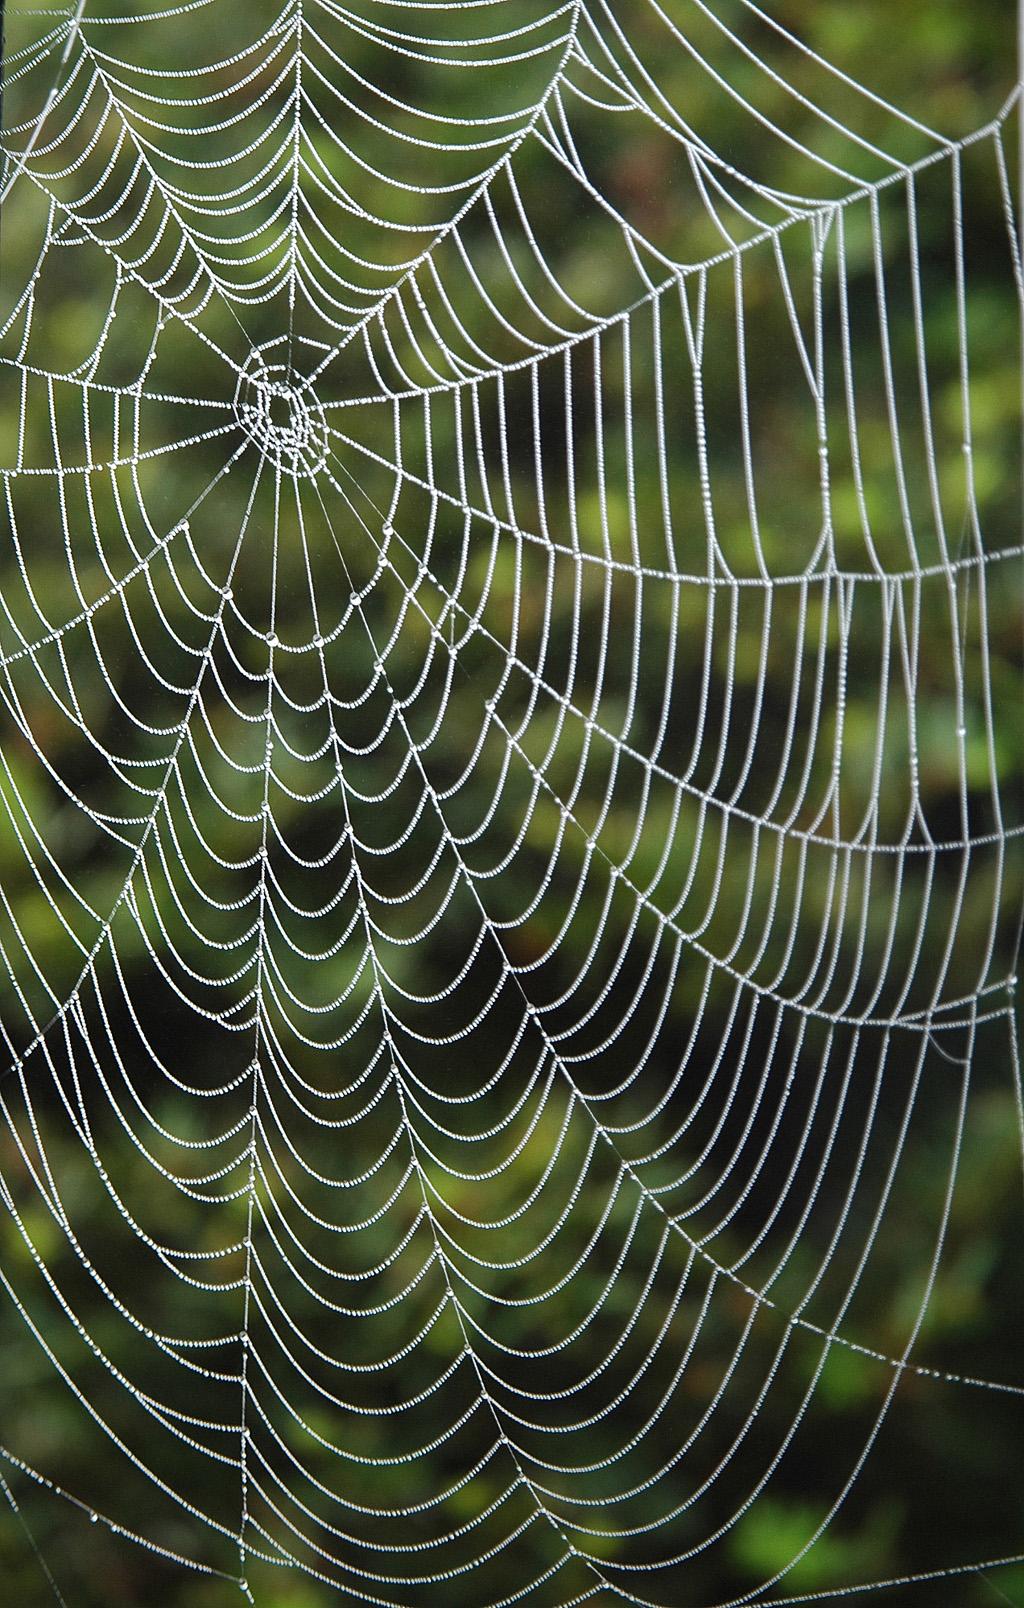 Spiderweb (user submitted)